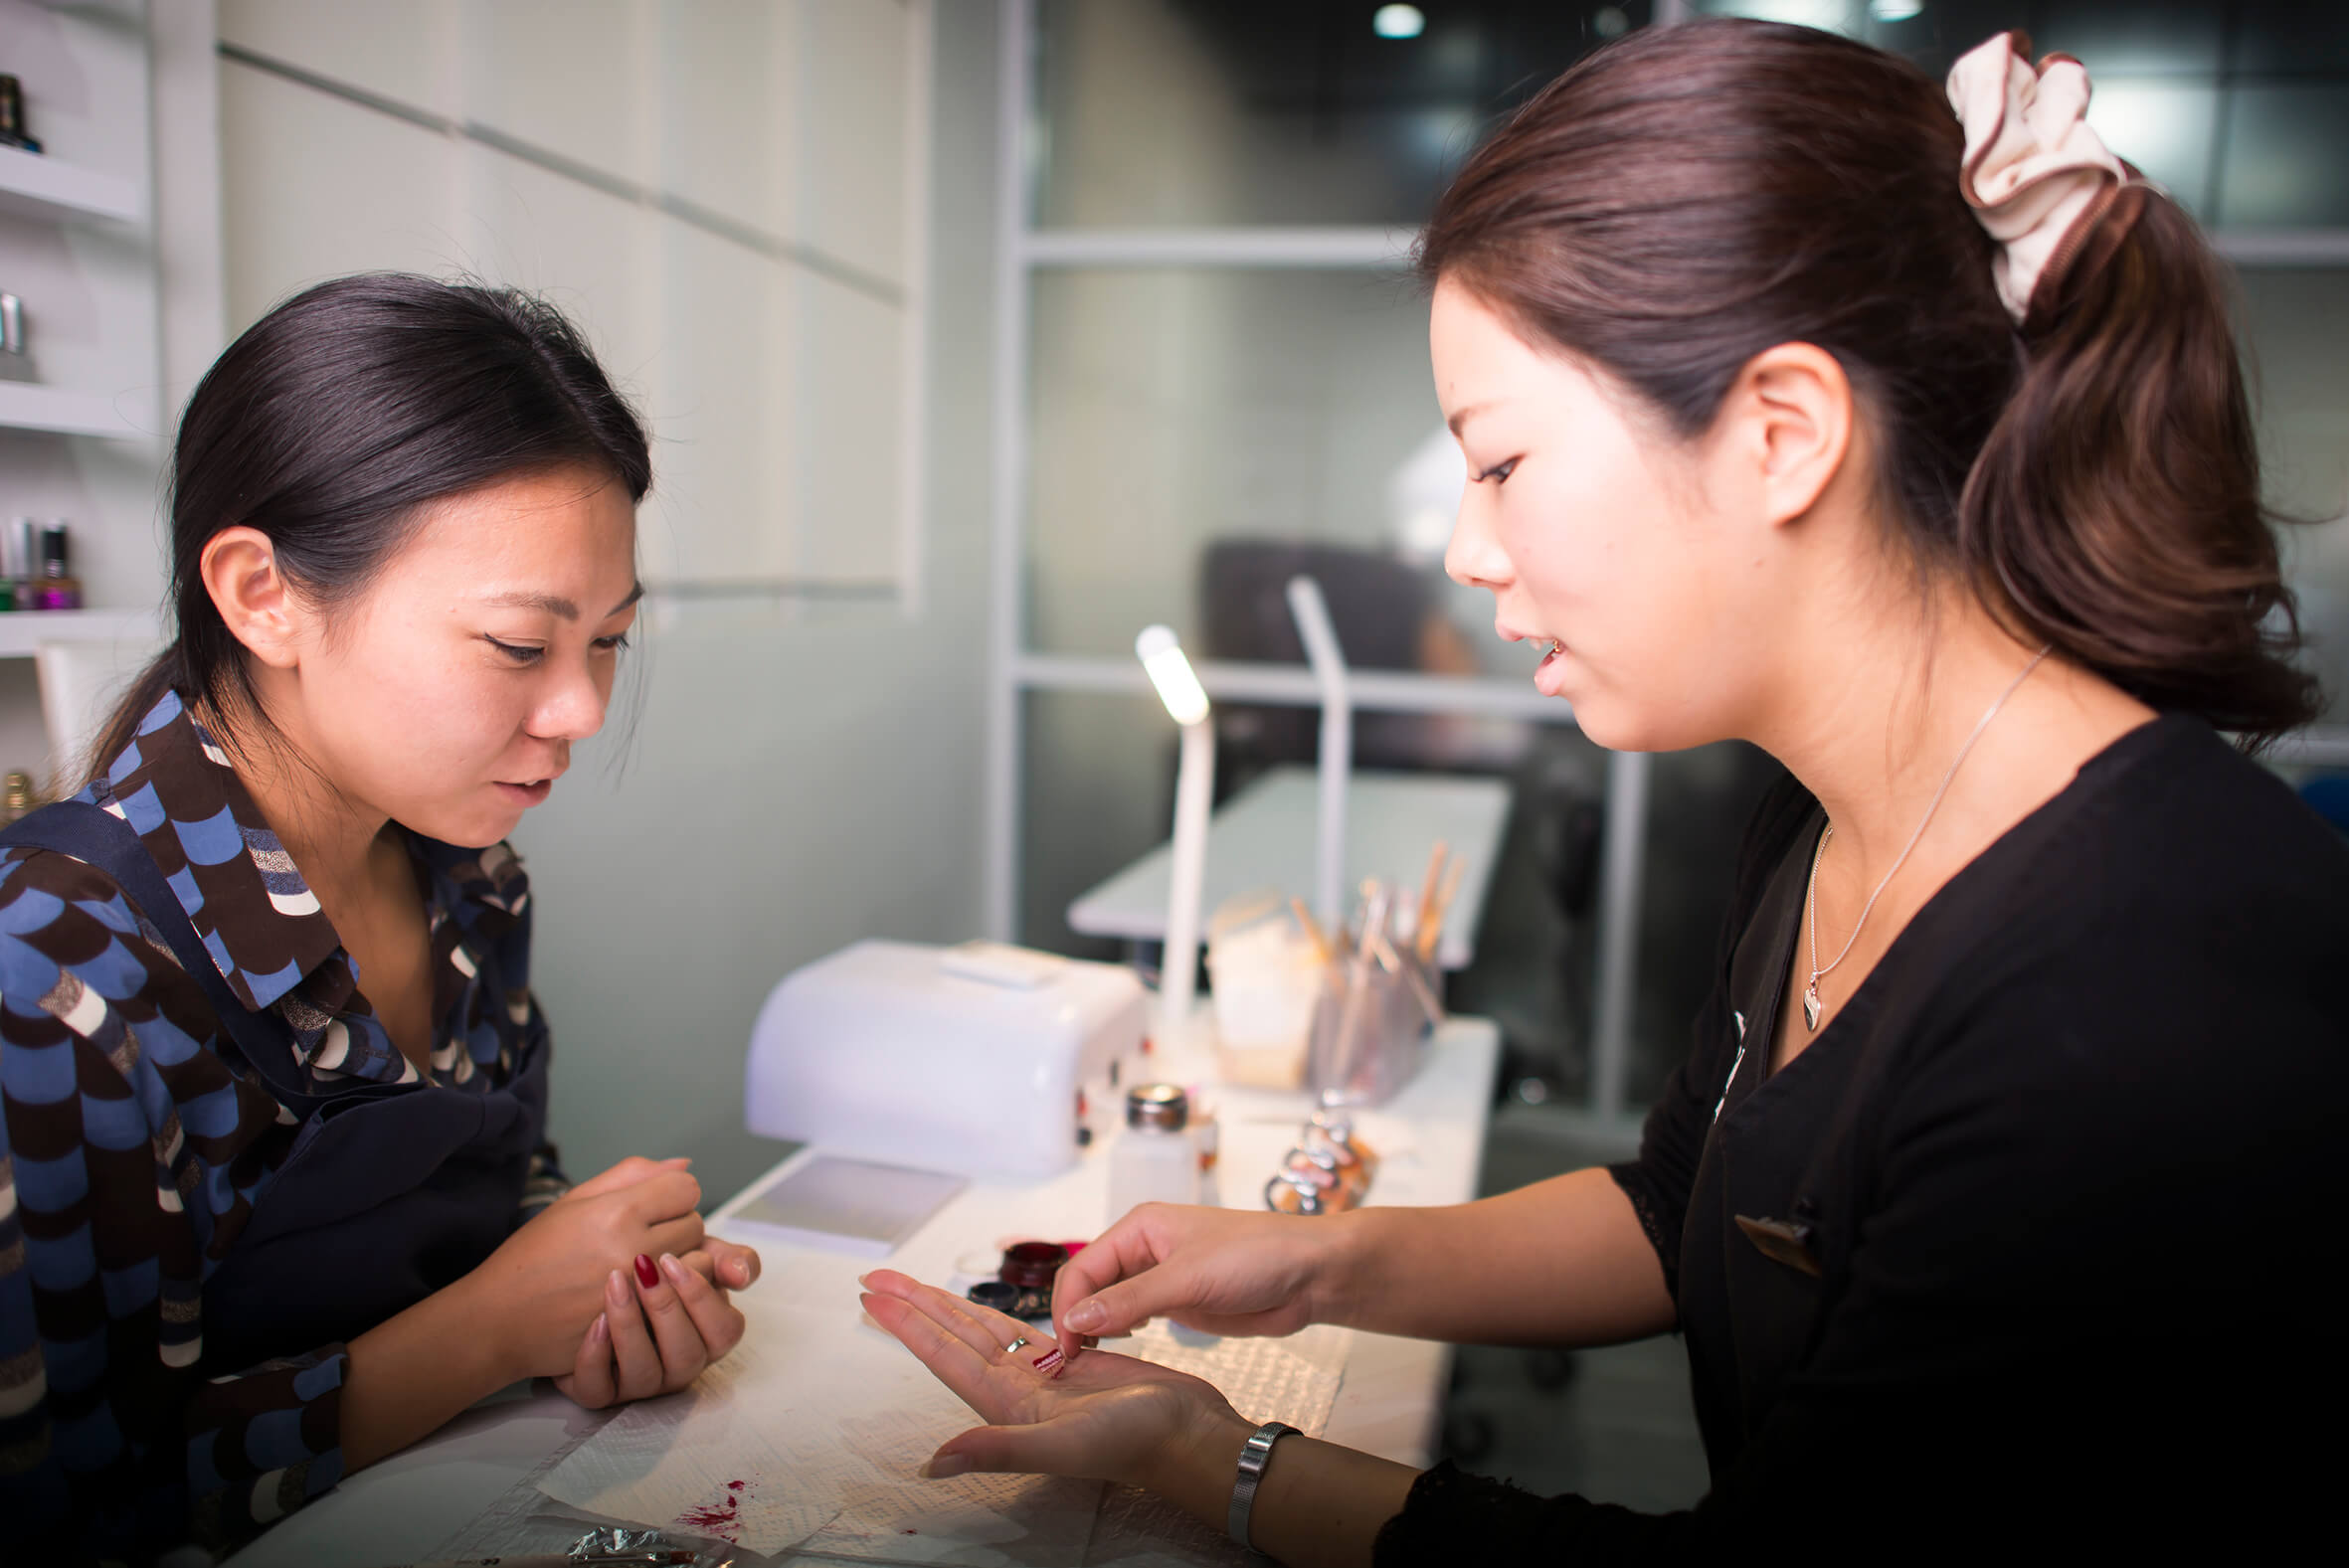 5 Best Nails Salons in Sydney - Update List of Leading Nail Salons